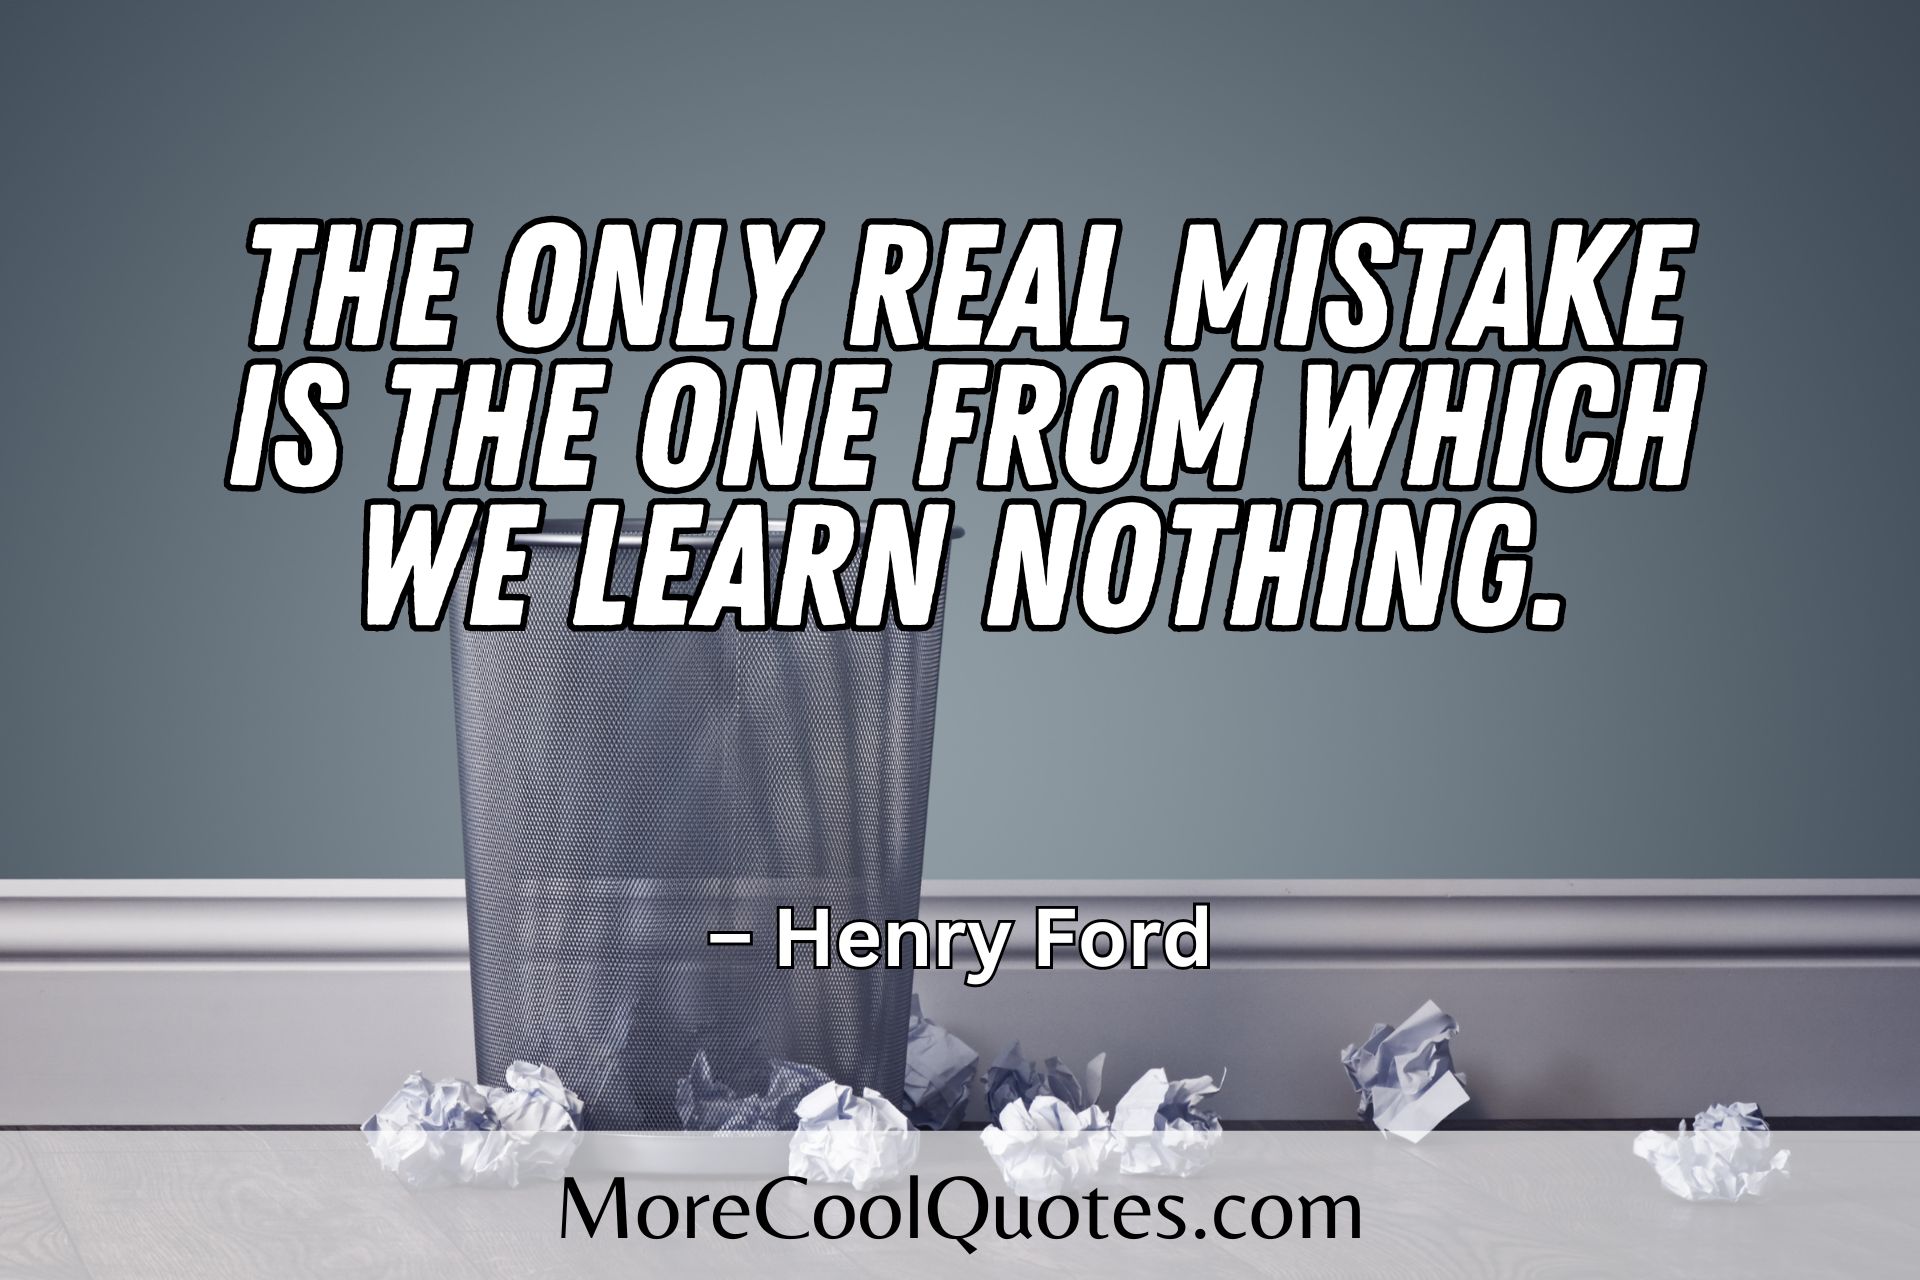 The only real mistake is the one from which we learn nothing. – quotes by Henry Ford